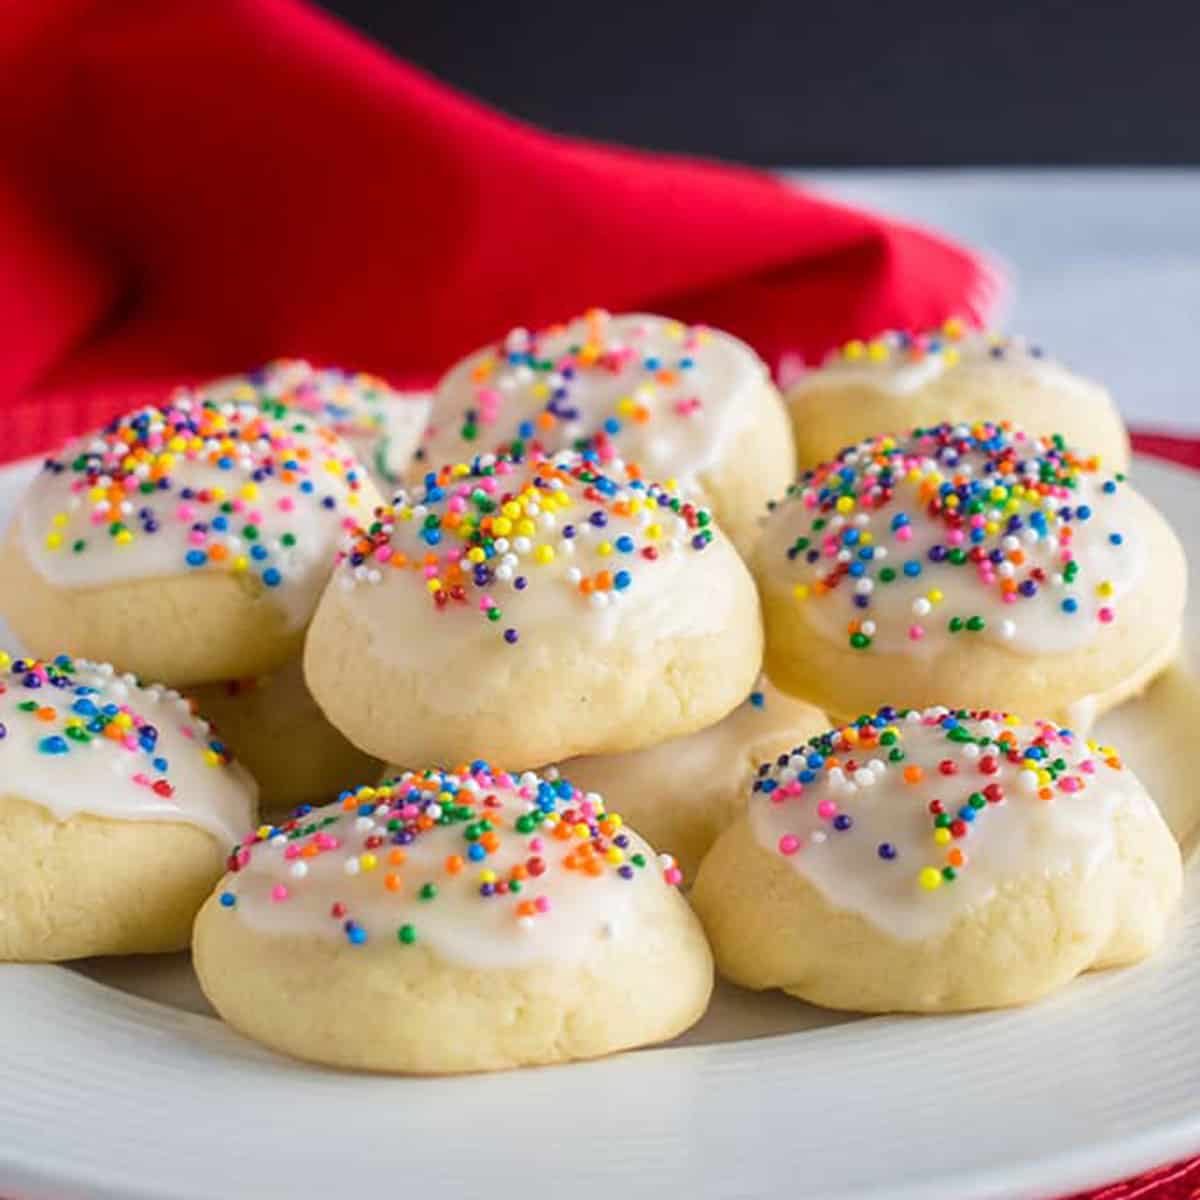 A plate of small round cookies with vanilla icing and colored sprinkles.